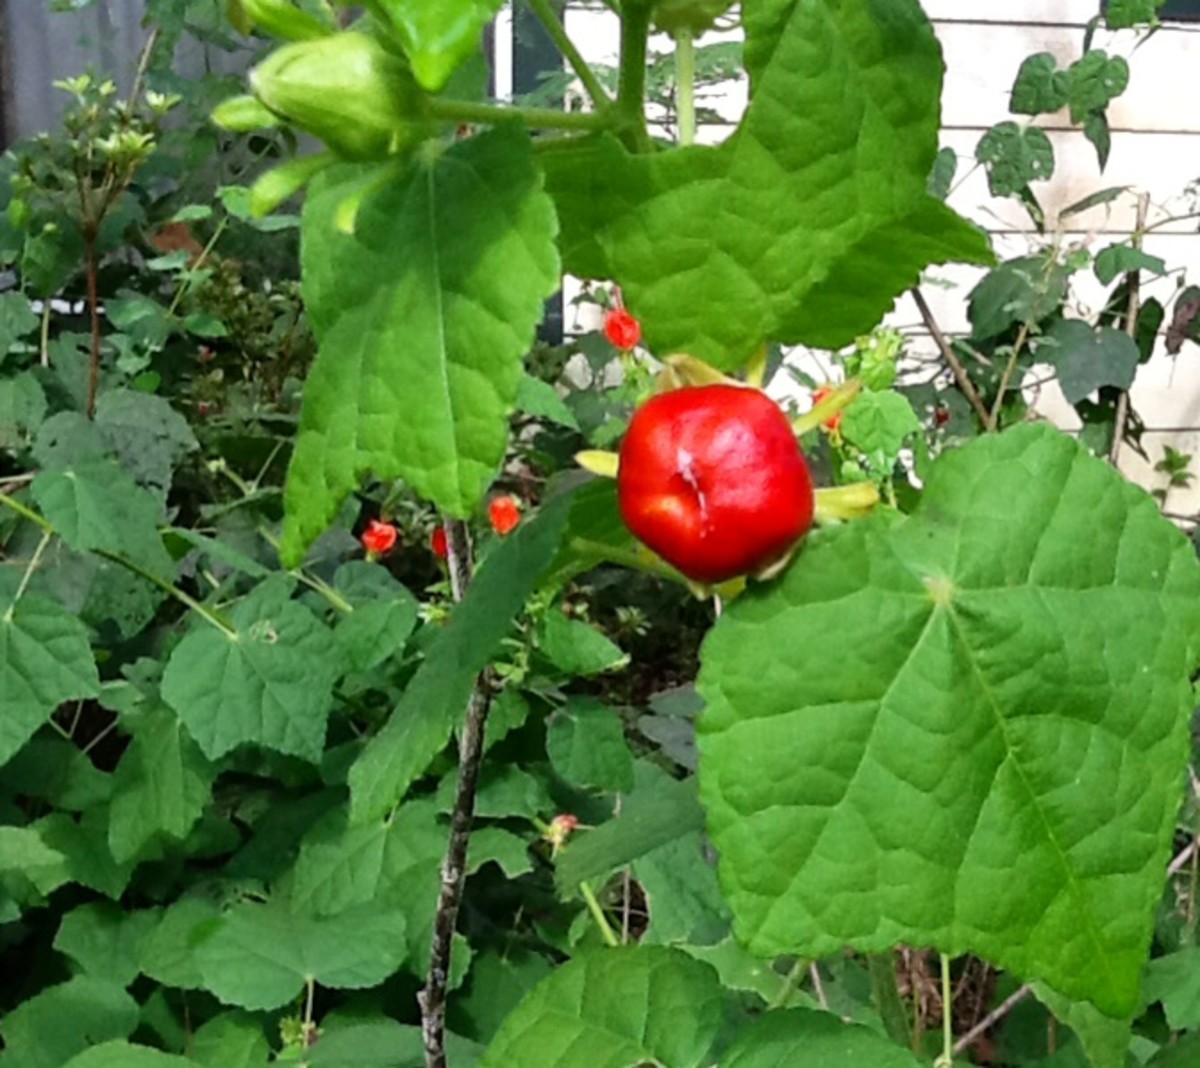 The fleshy fruit of Turk's cap is eaten by songbirds while the flowers are a favorite of hummingbirds.